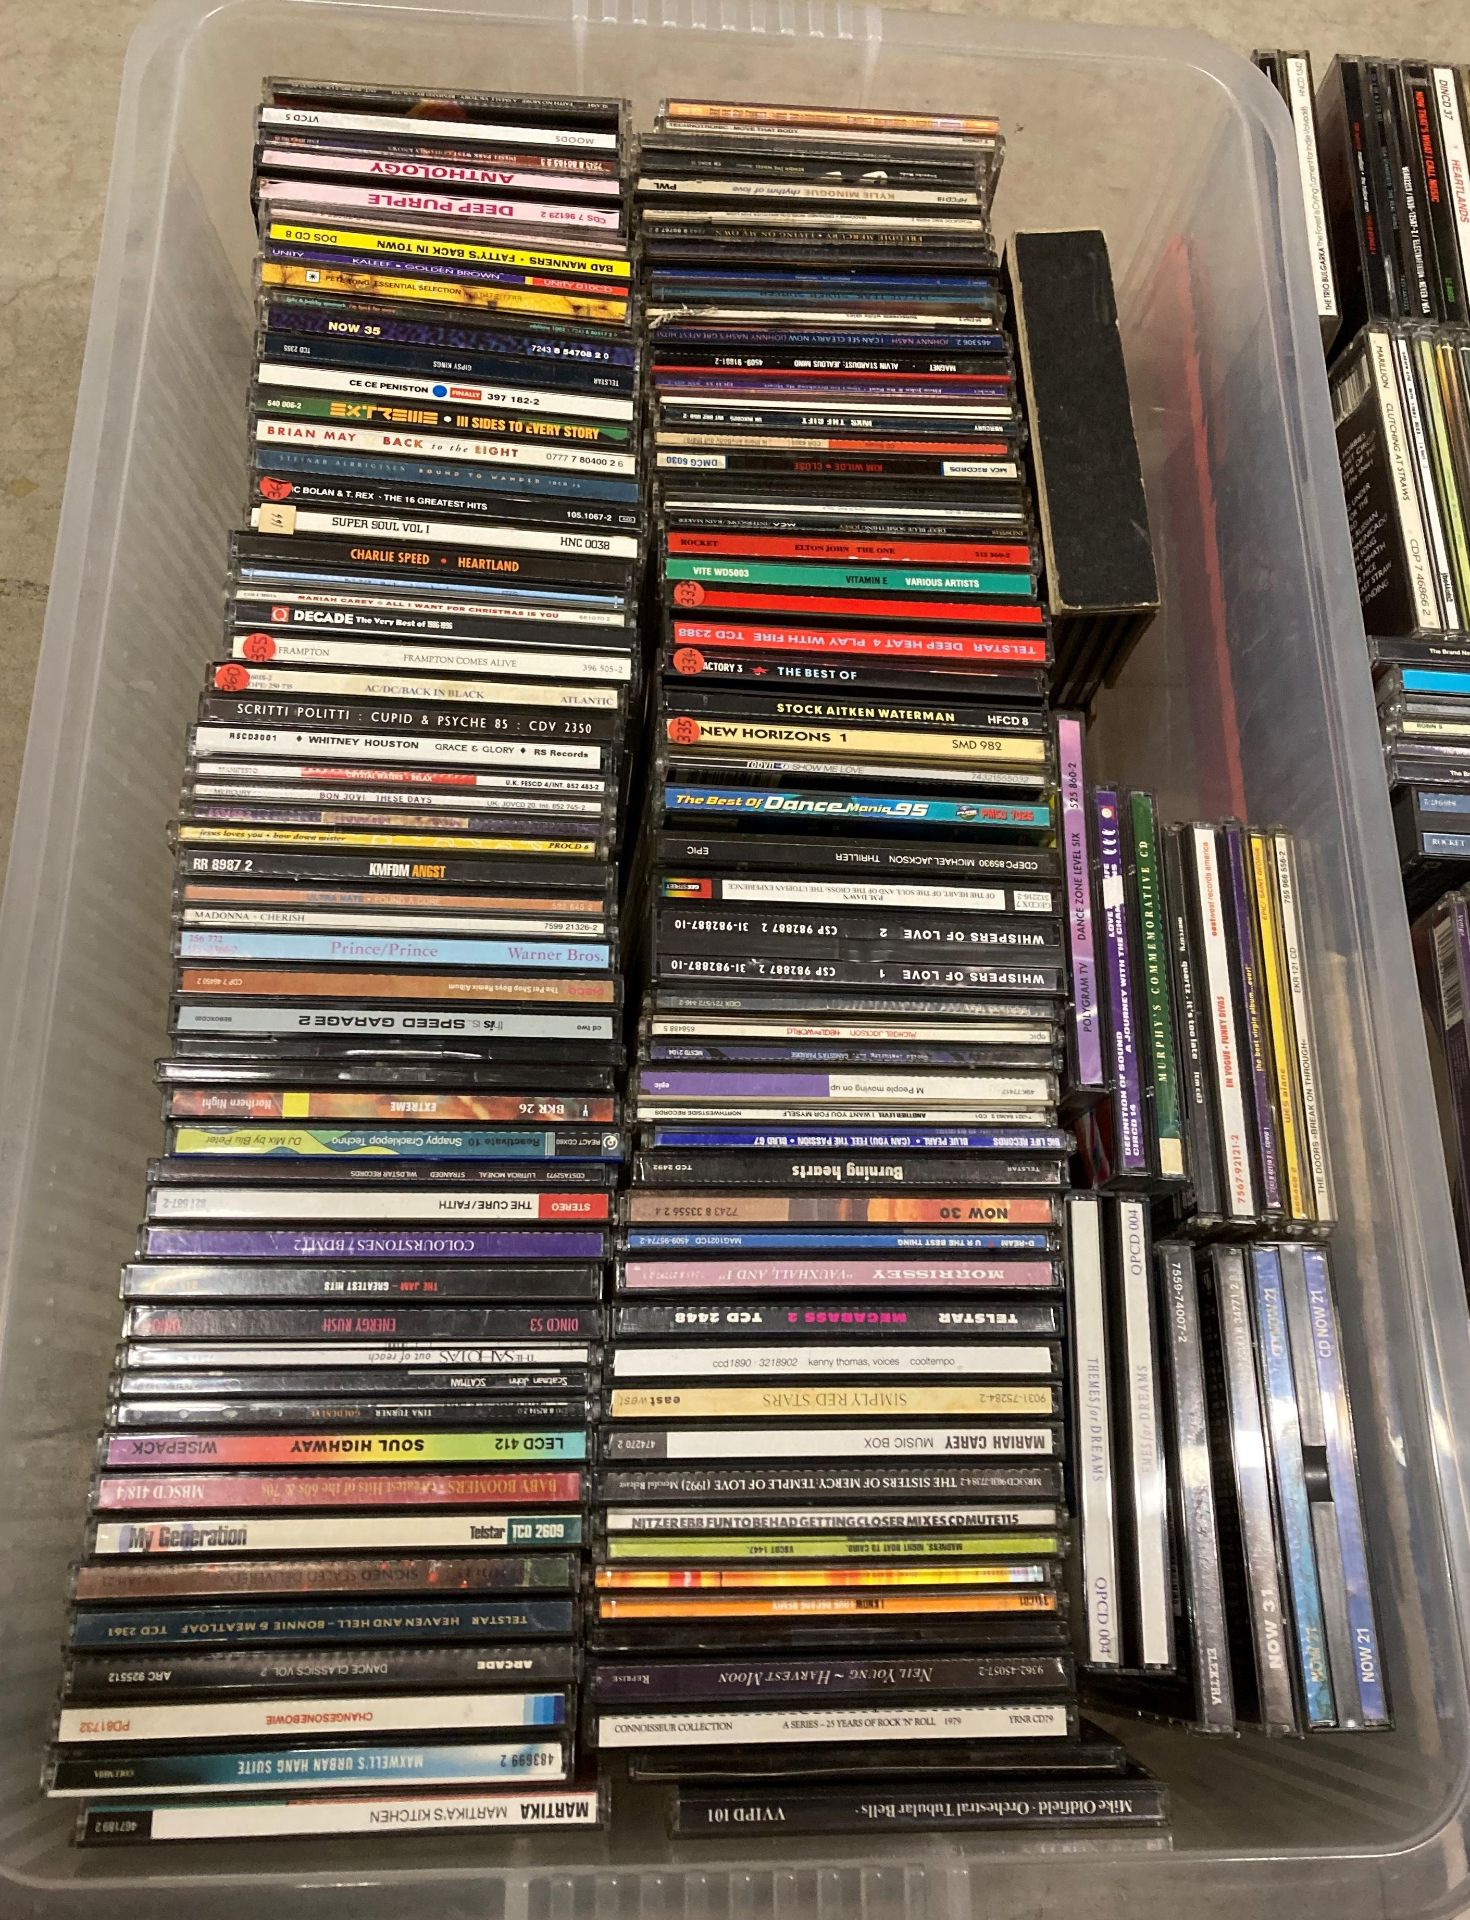 Approximately 330 assorted music CDs including singles and albums. - Image 4 of 4